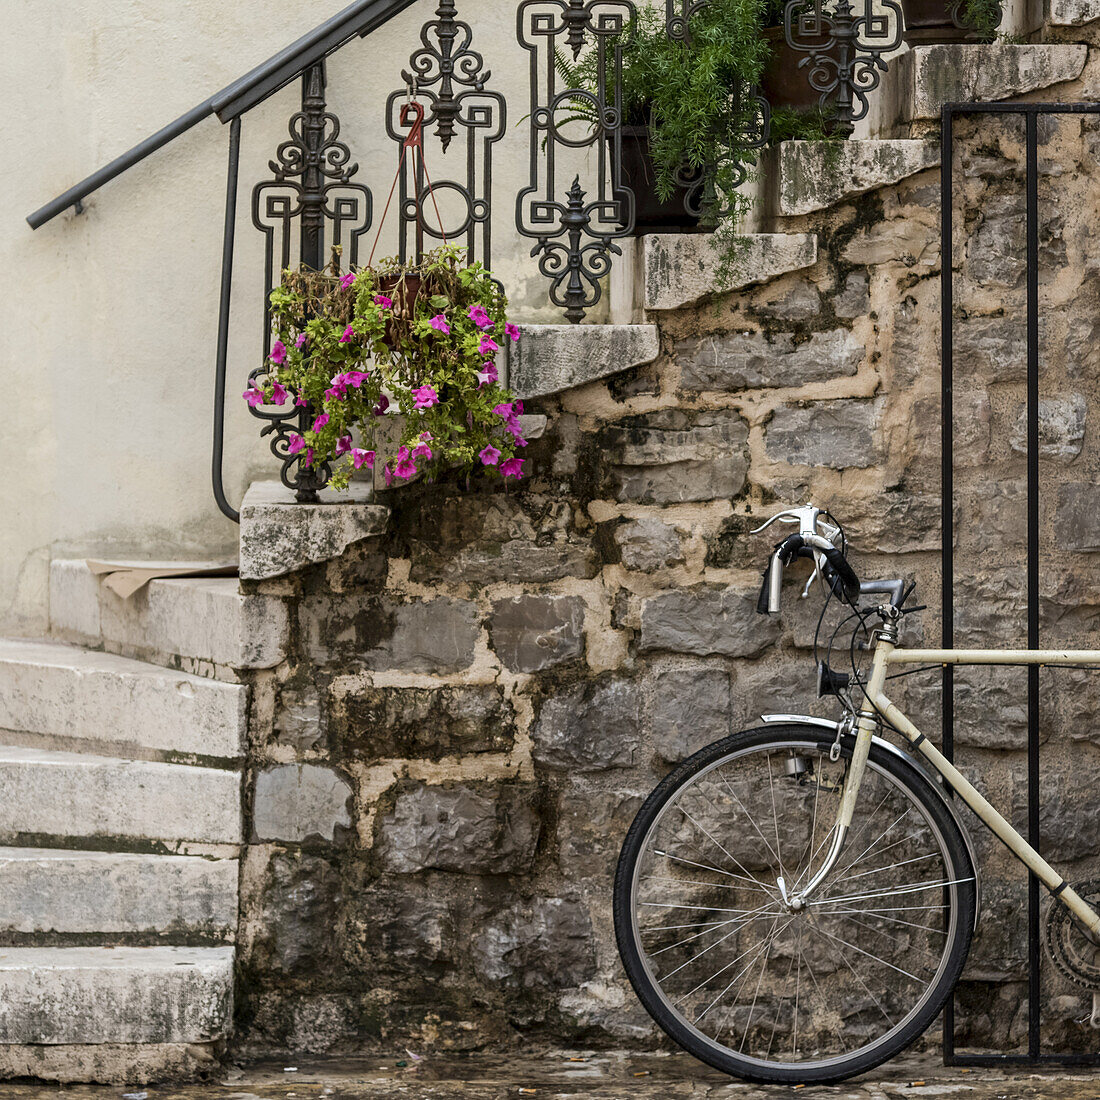 A bicycle parked beside a stone wall with steps leading up and plants decorating the railing; Budva, Opstina Budva, Montenegro